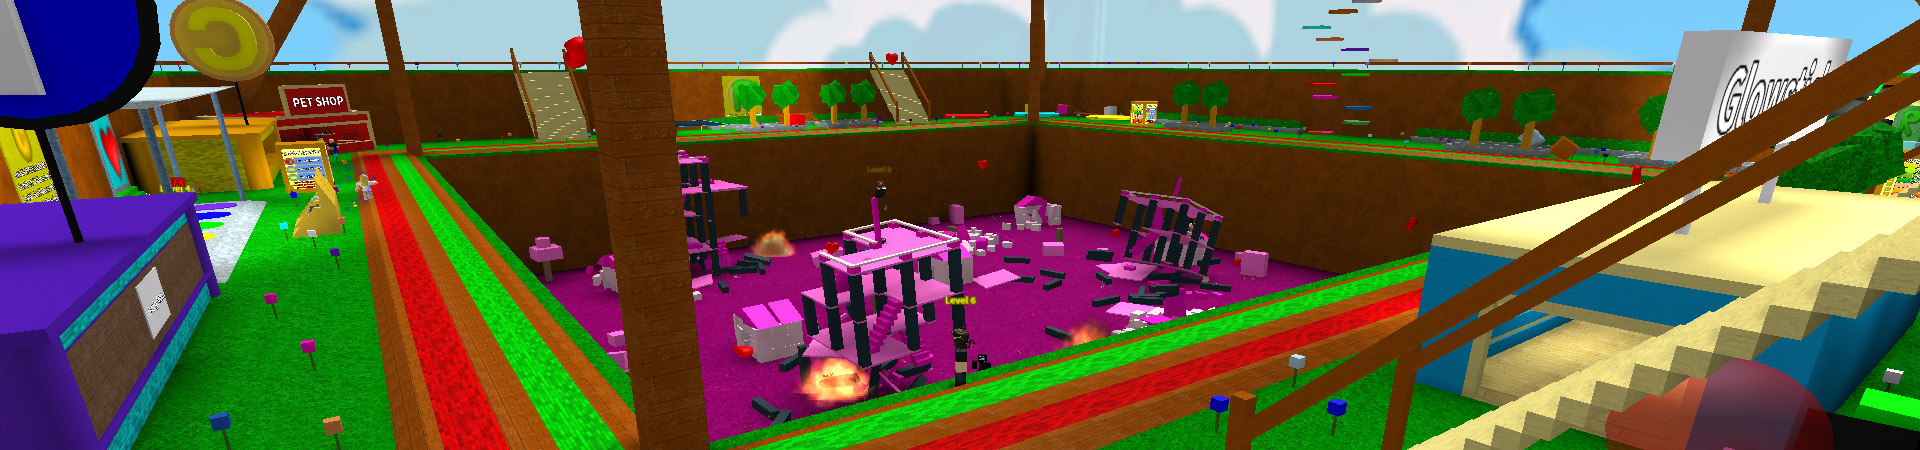 How Ripull Minigames Dominated Roblox This Winter Roblox Blog